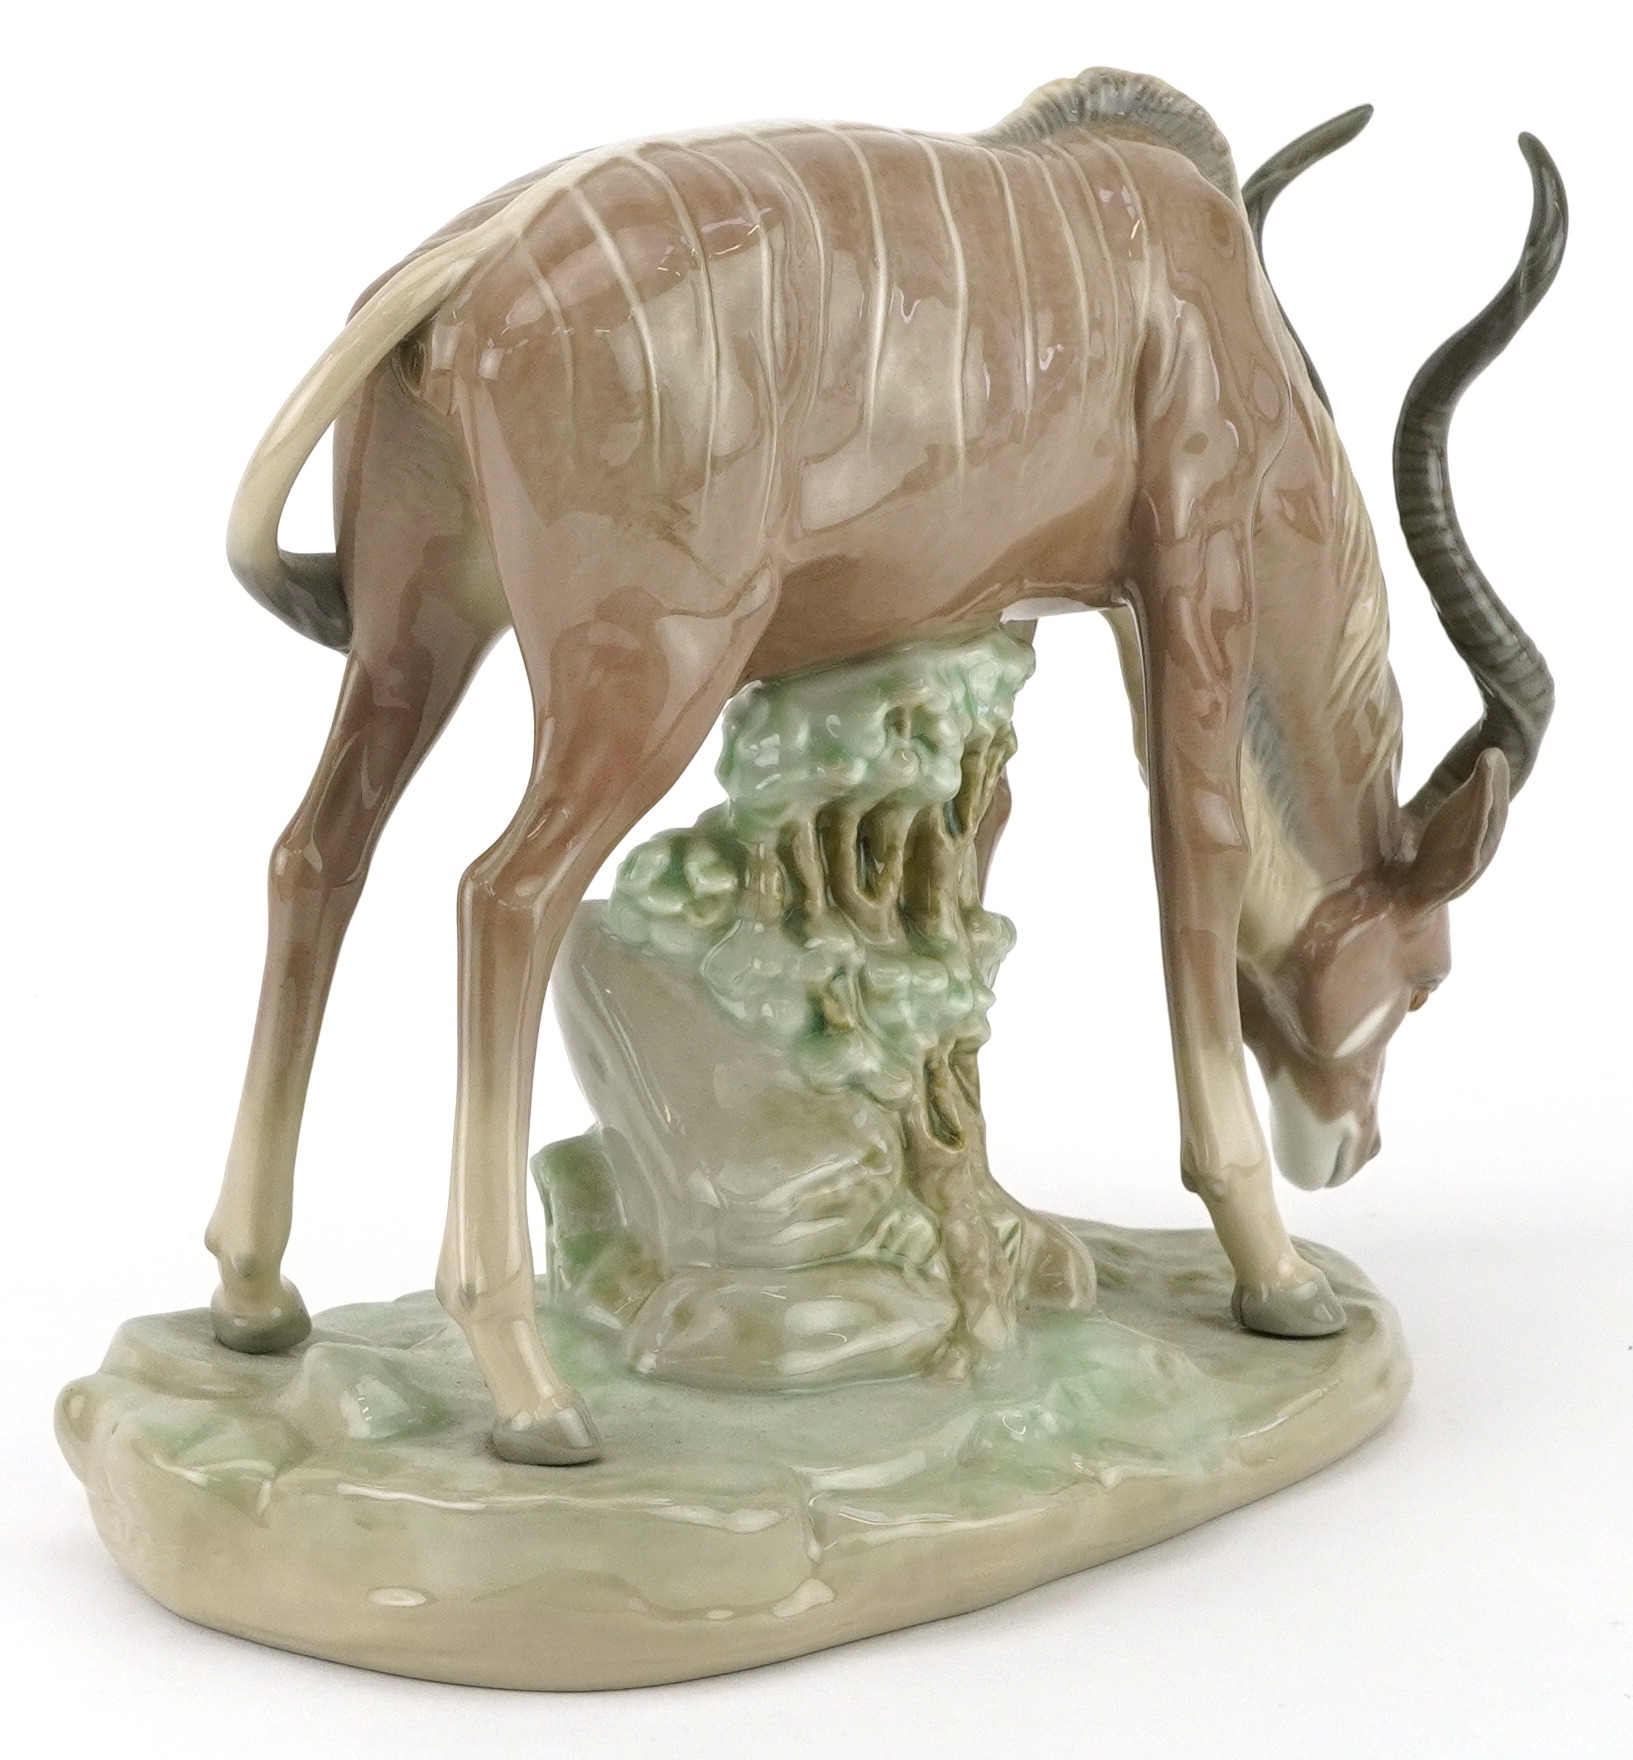 Lladro antelope on naturalistic base, 5302, 23cm in length - Image 2 of 3